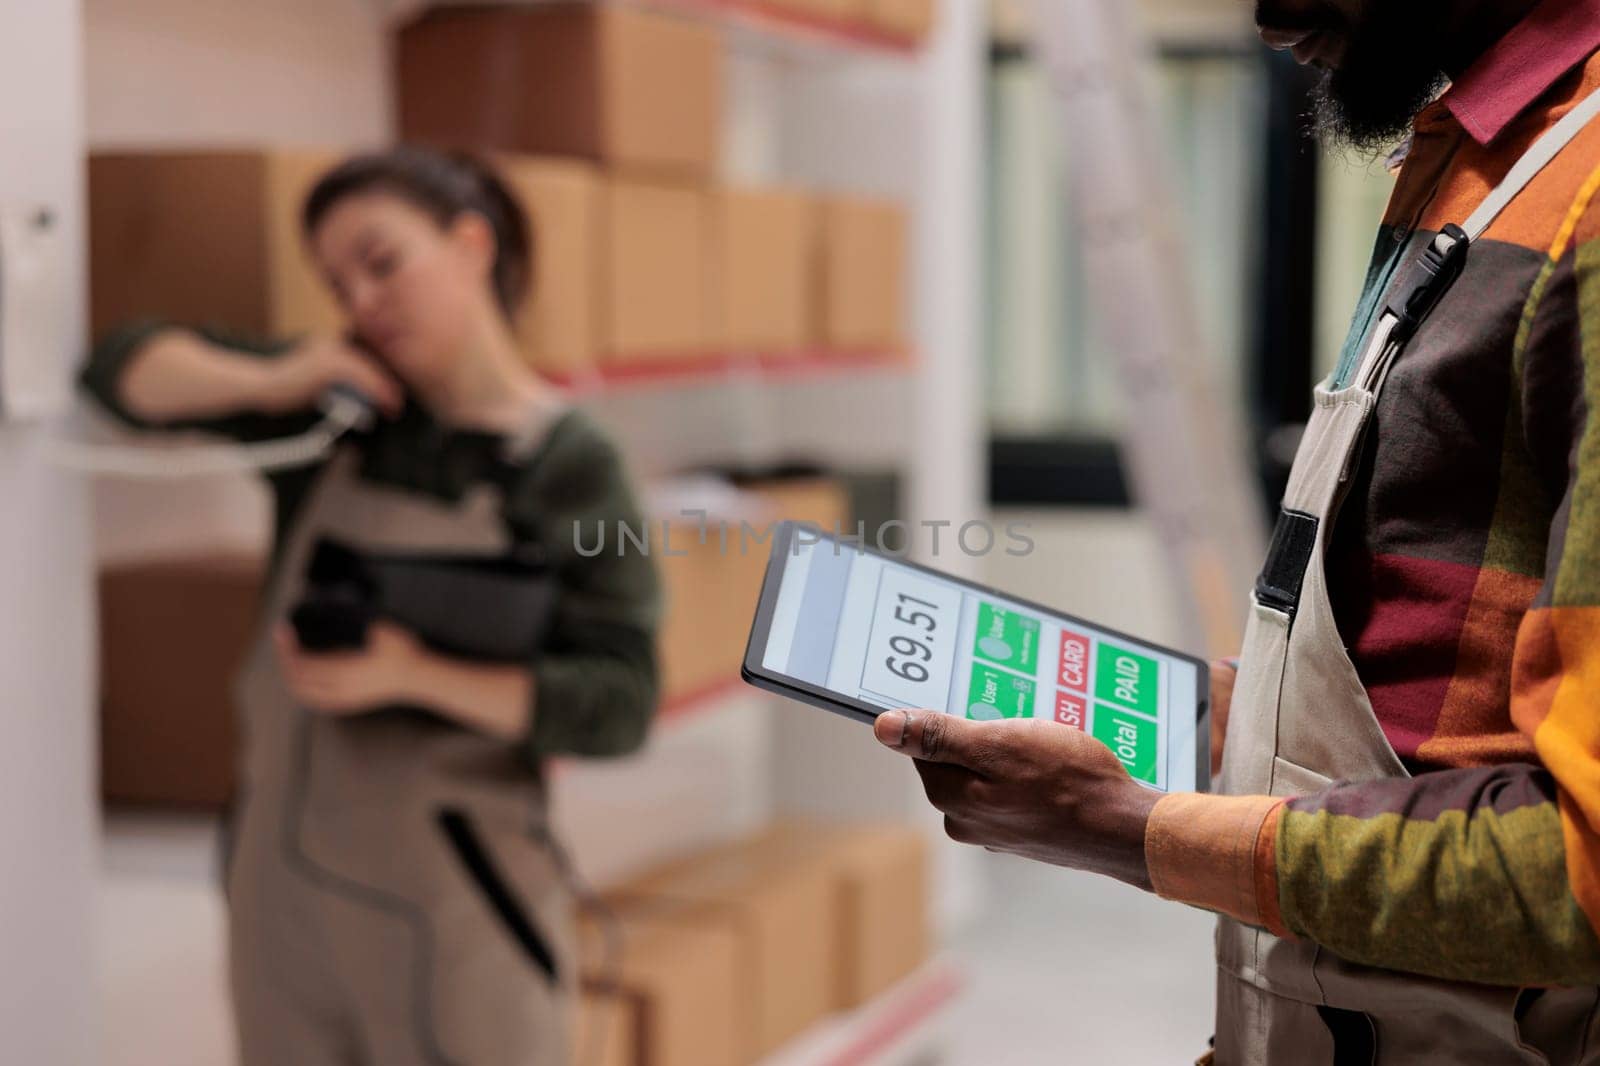 Warehouse supervisor holding tablet computer by DCStudio